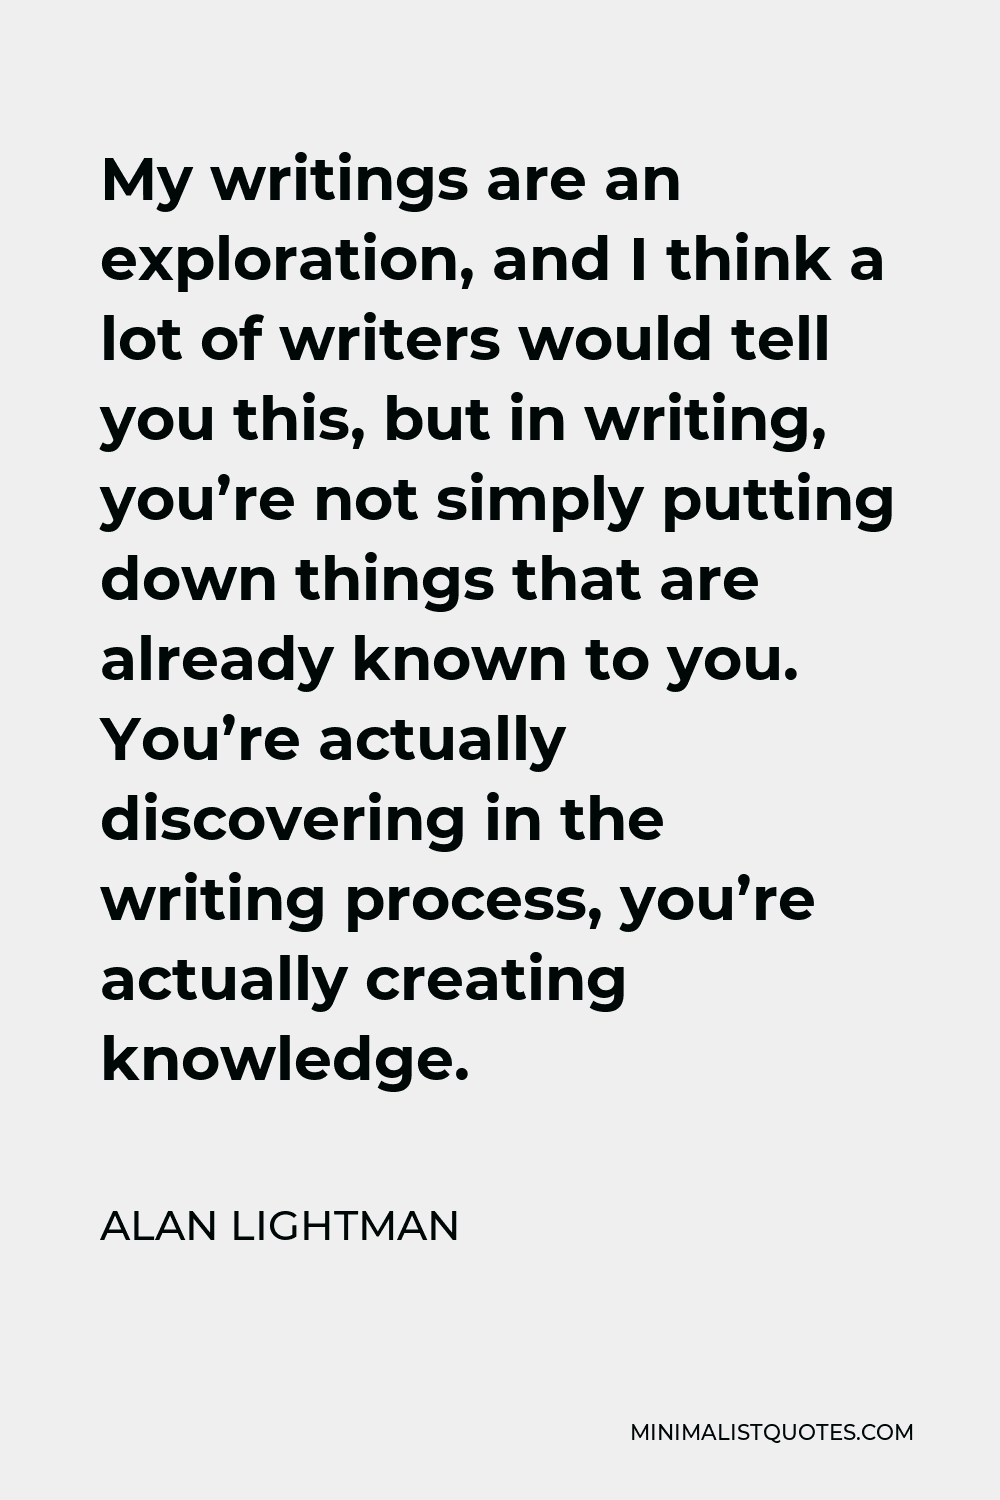 Alan Lightman Quote - My writings are an exploration, and I think a lot of writers would tell you this, but in writing, you’re not simply putting down things that are already known to you. You’re actually discovering in the writing process, you’re actually creating knowledge.